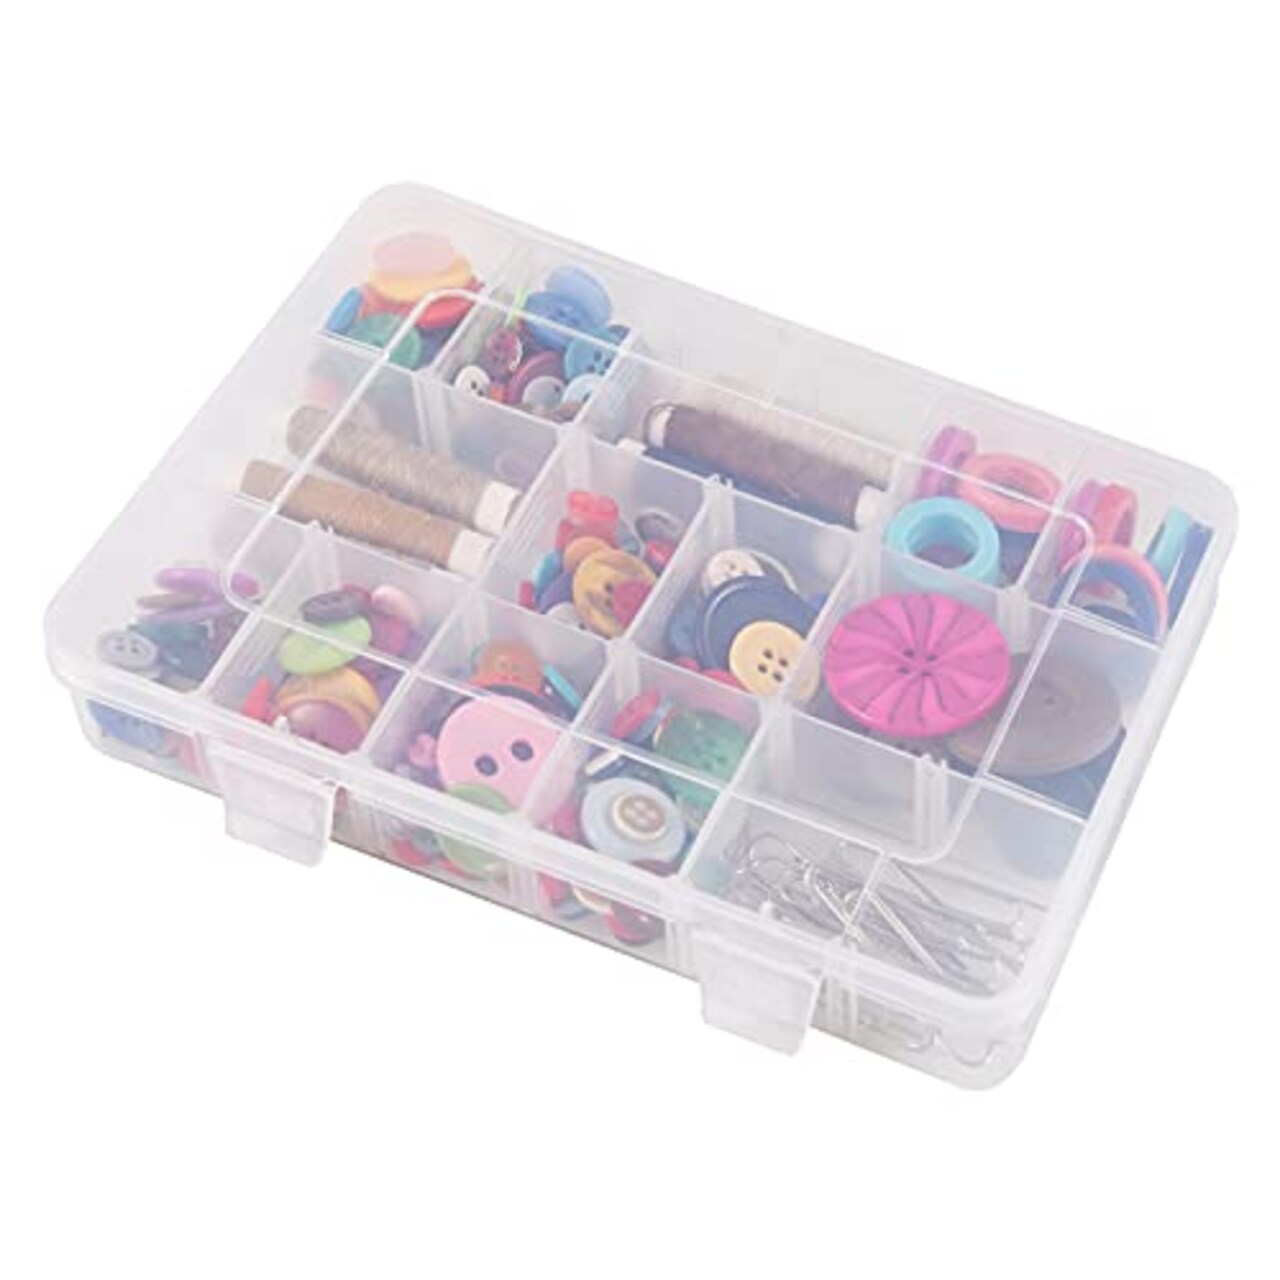 18 Grids Plastic Organizer Box with Dividers, Exptolii Clear Compartment  Container Storage for Beads Crafts Jewelry Fishing Tackles, Size 7.9 x 6.2  x 1.2 in